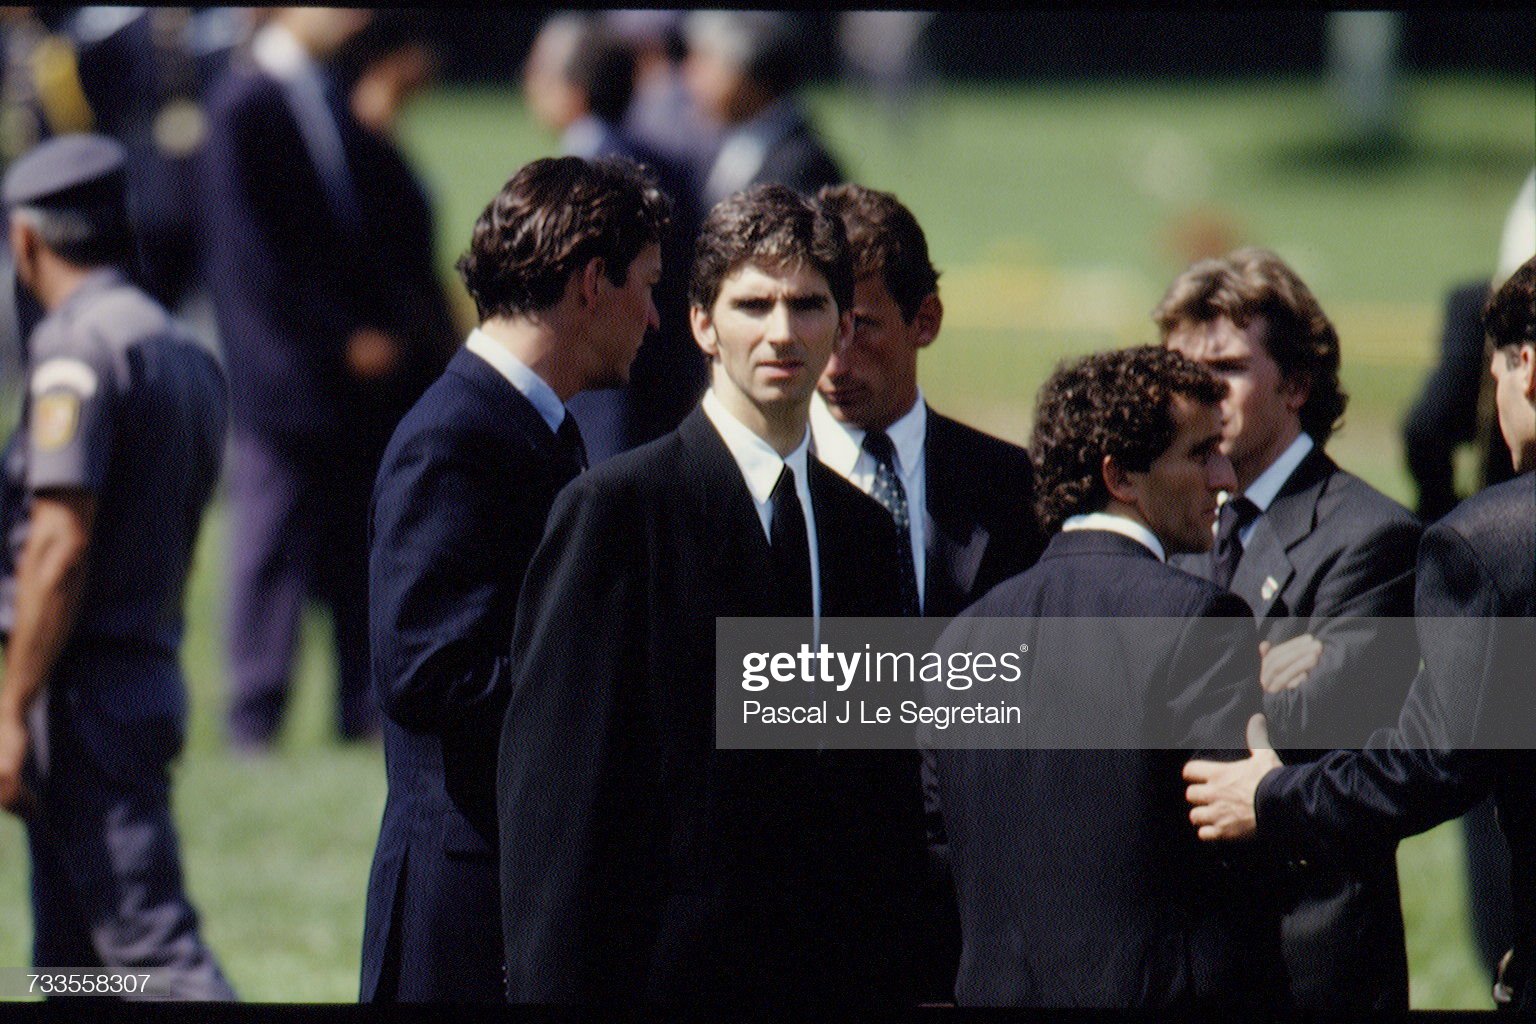 Damon Hill and Alain Prost at the funeral of Ayrton Senna.